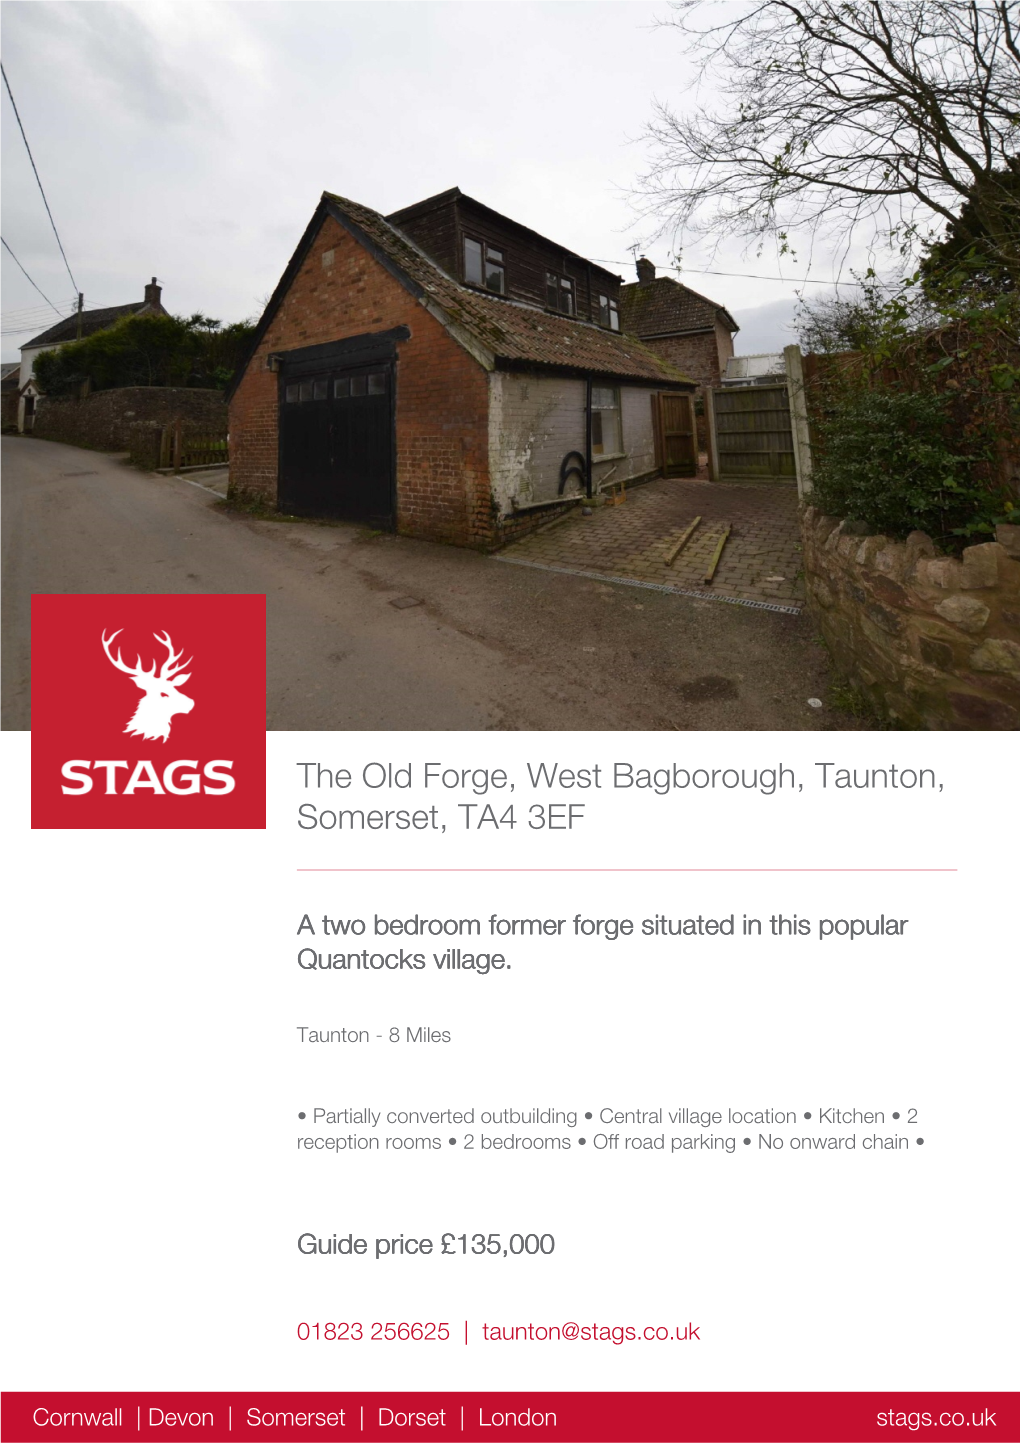 The Old Forge, West Bagborough, Taunton, Somerset, TA4 3EF